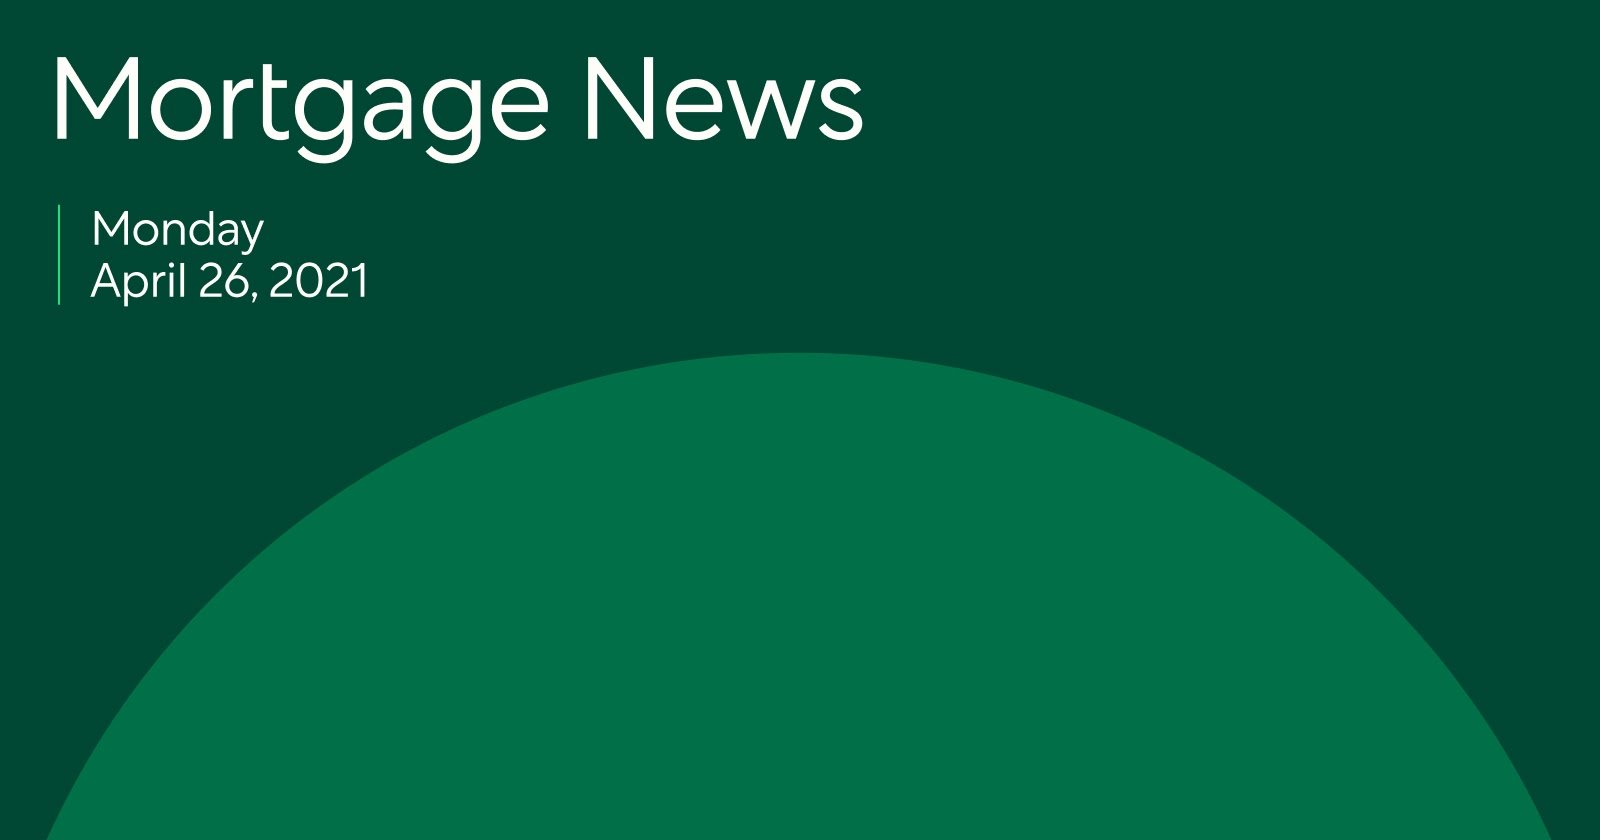 Mortgage News 4/26/2021: More Homeowners Are Refinancing As Rates Dip